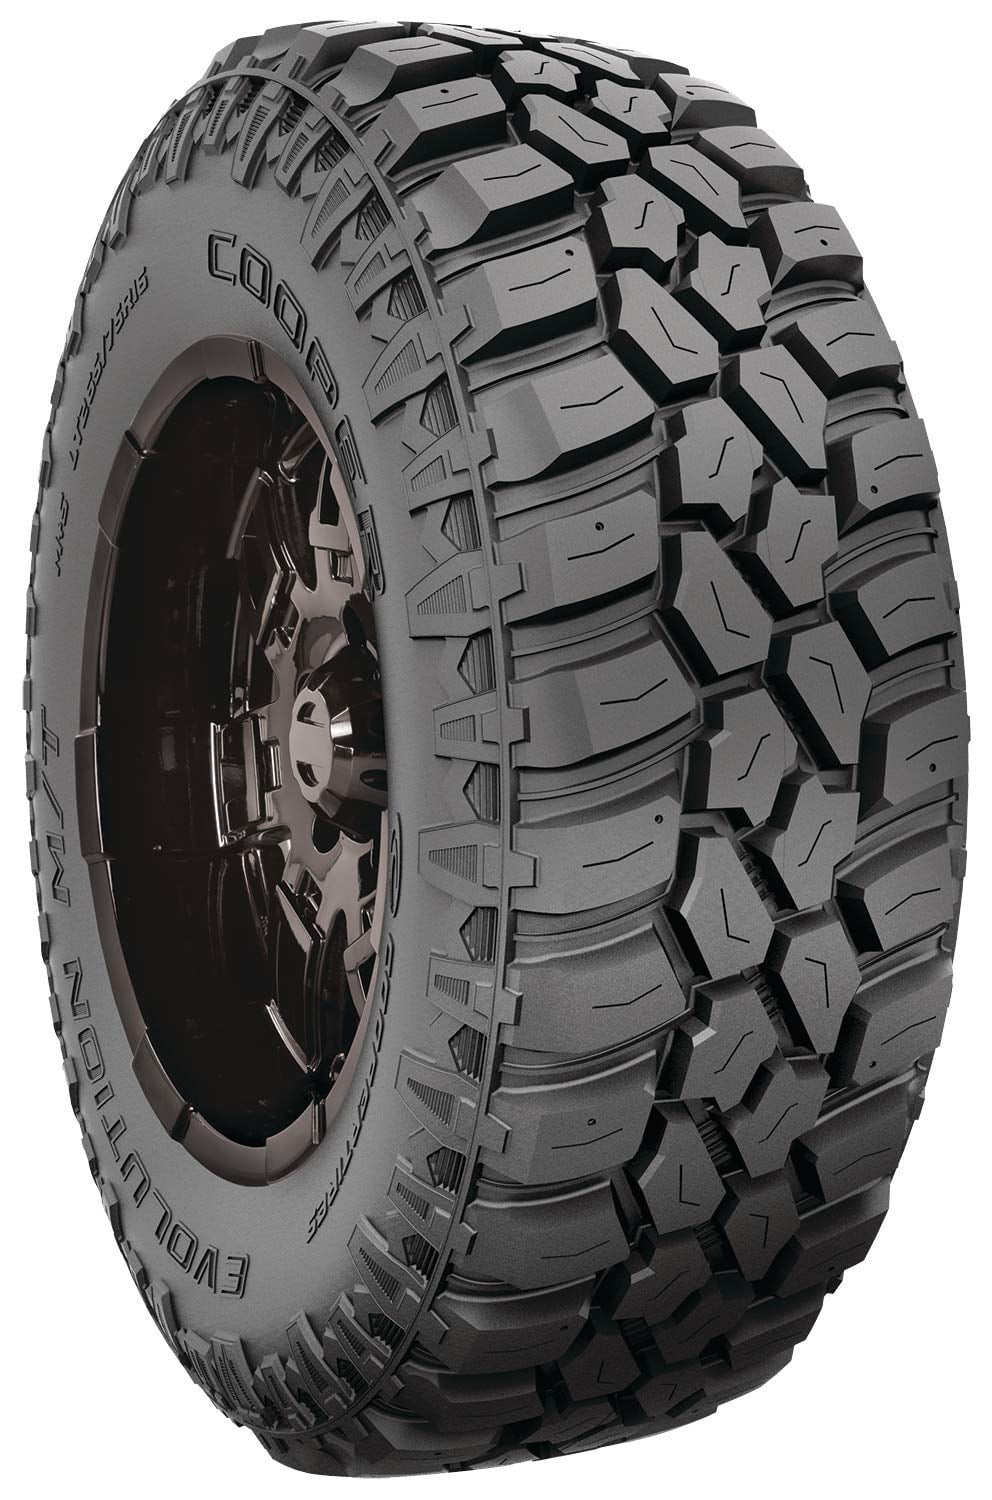 Cooper Evolution M/T All-Terrain Tire - LT295/70R18 129Q LRE 10PLY Rated